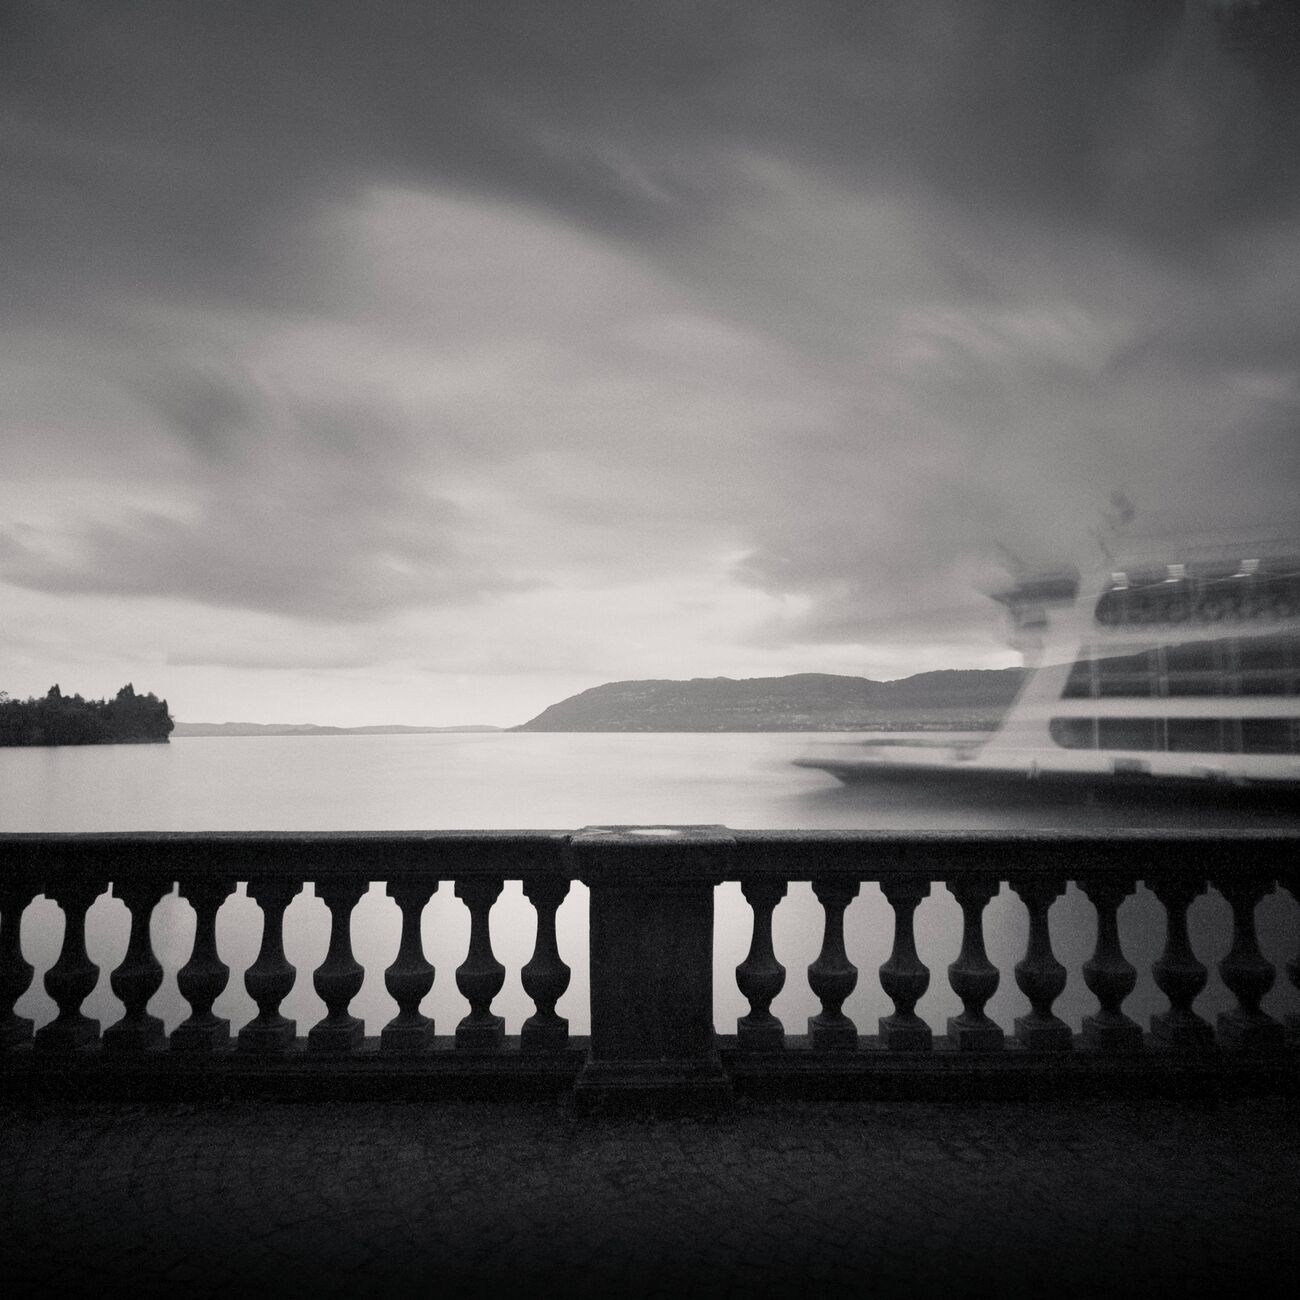 Ferry Cruising, Etude 2, Maggiore Lake, Italy. August 2014. Ref-1430 - Denis Olivier Photography